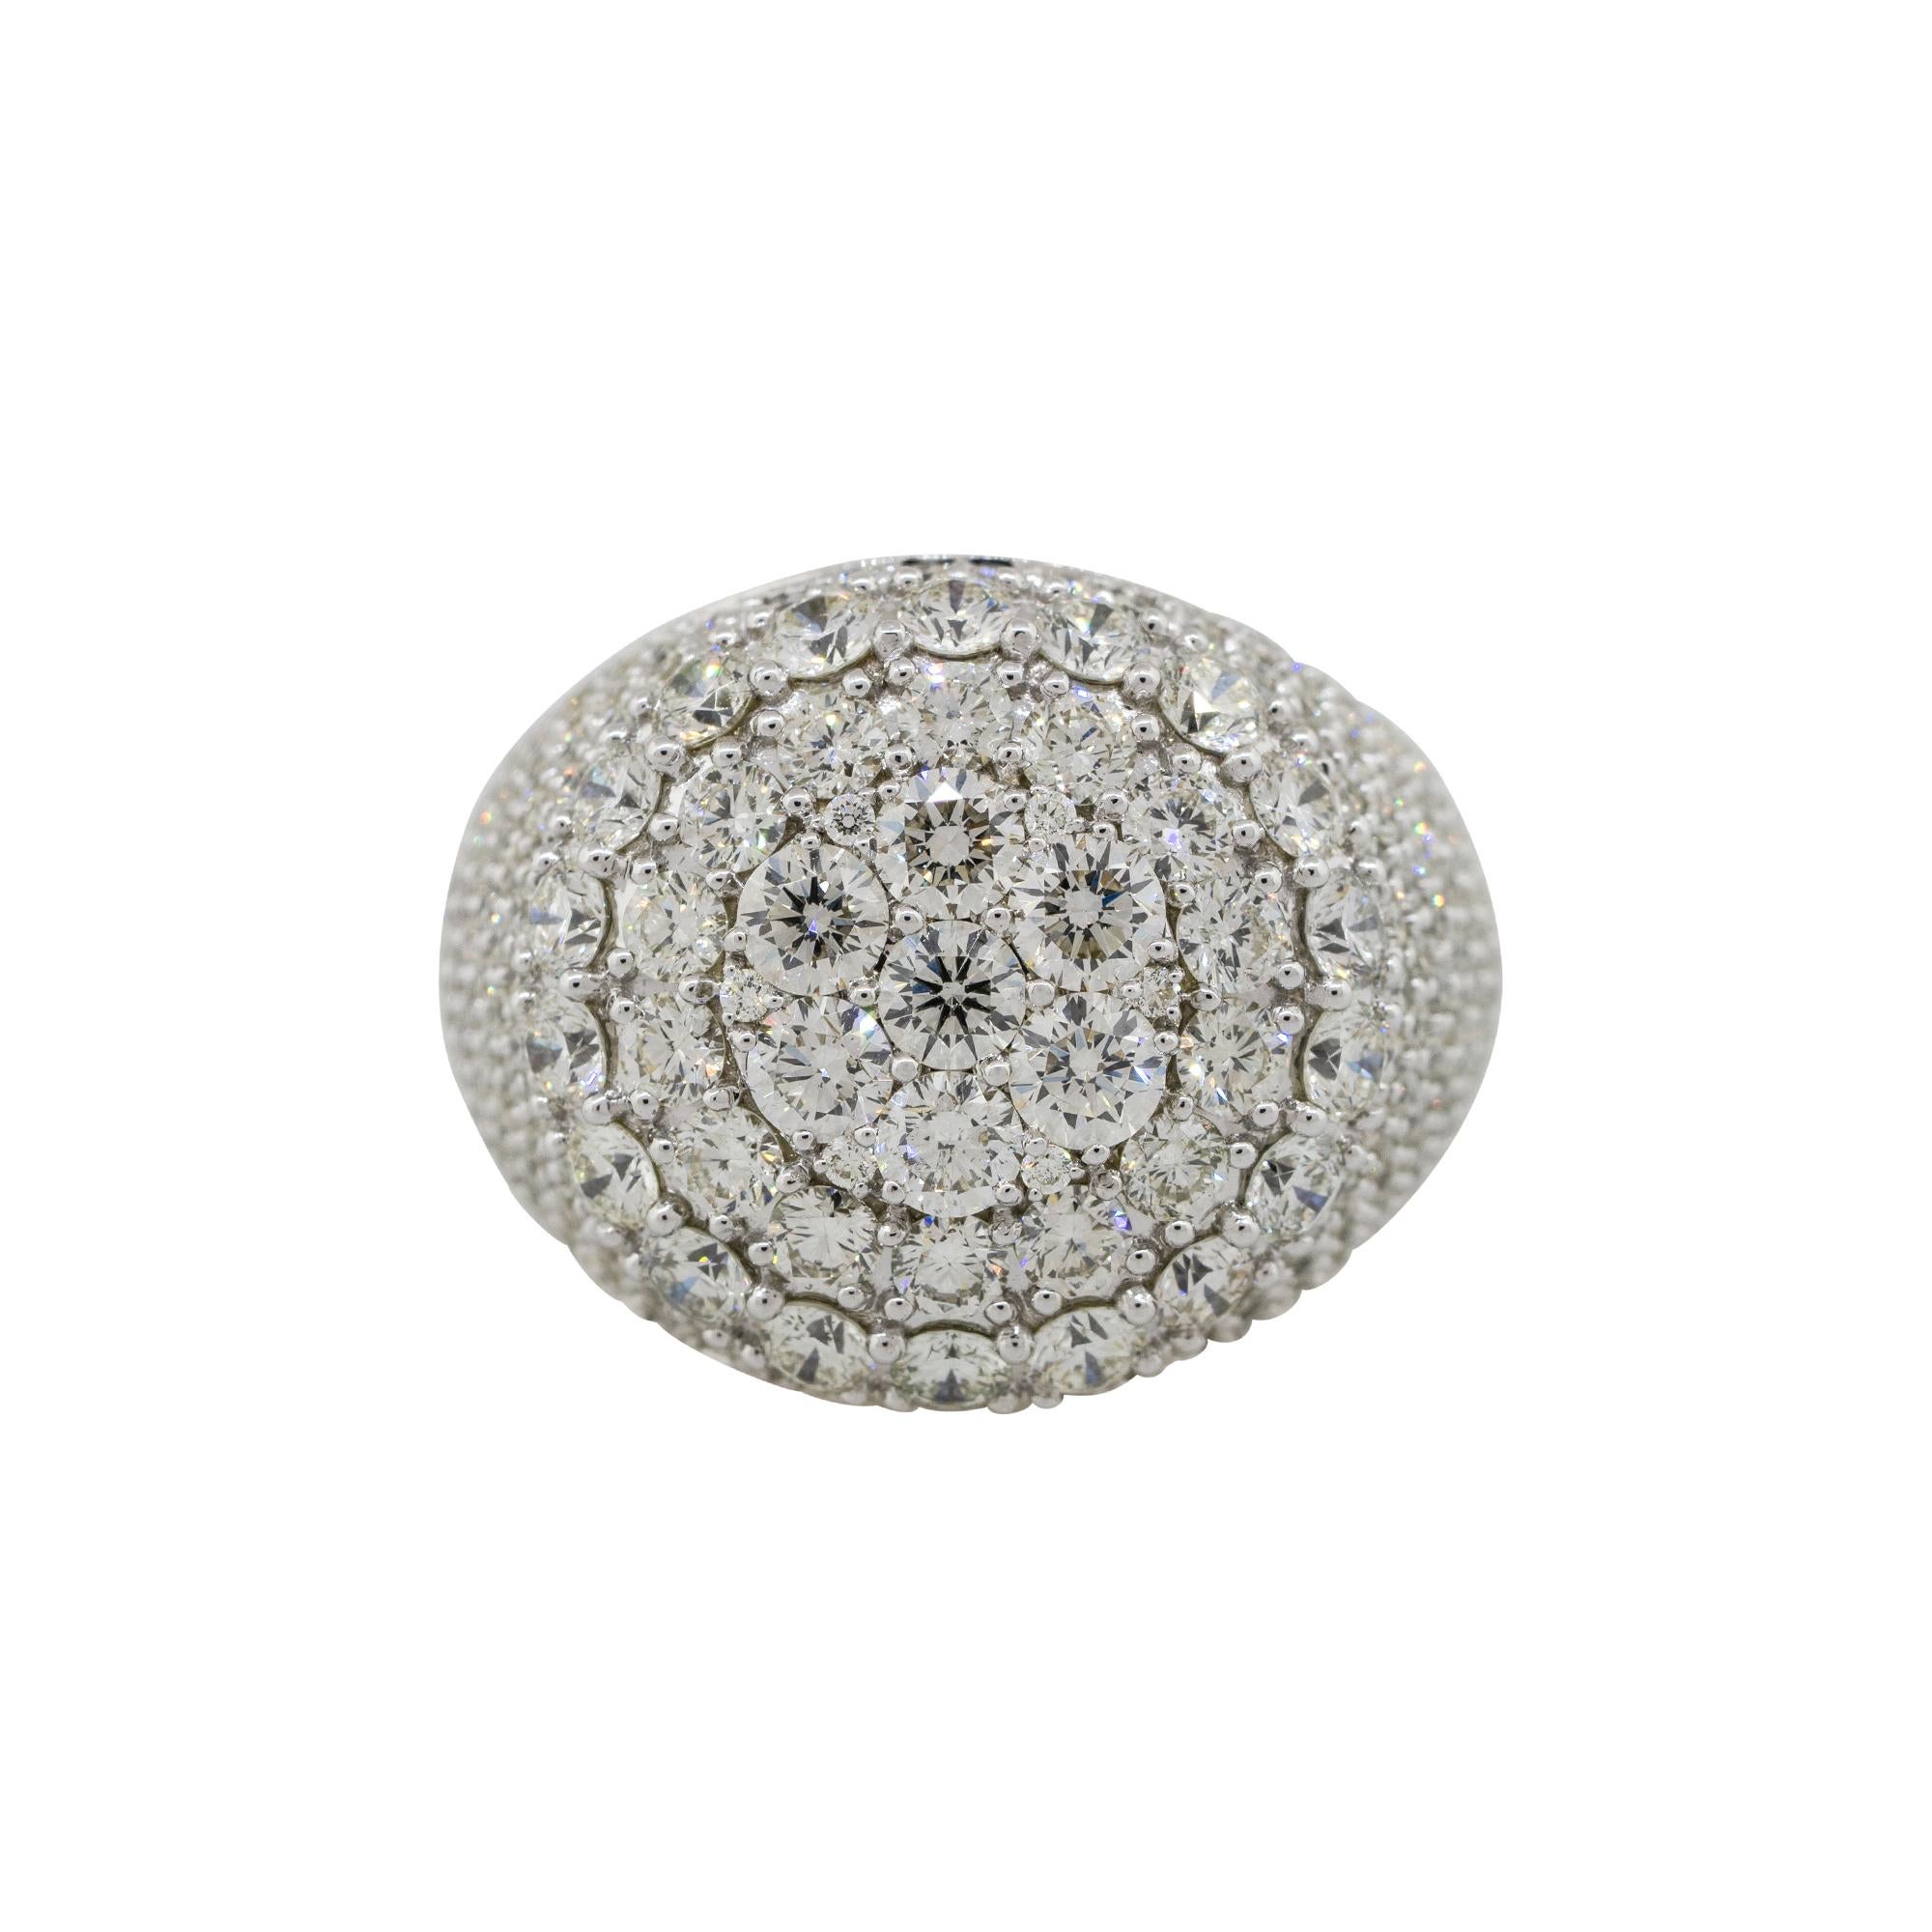 Material: 14k White Gold
Diamond Details: Approx. 5.45ct of round & baguette cut Diamonds. Diamonds are G/H in color and VS in clarity
Size: 10 
Measurements: 25 x 19.5 x 30mm
Weight: 20.9g (13.5dwt)
Additional Details: This item comes with a